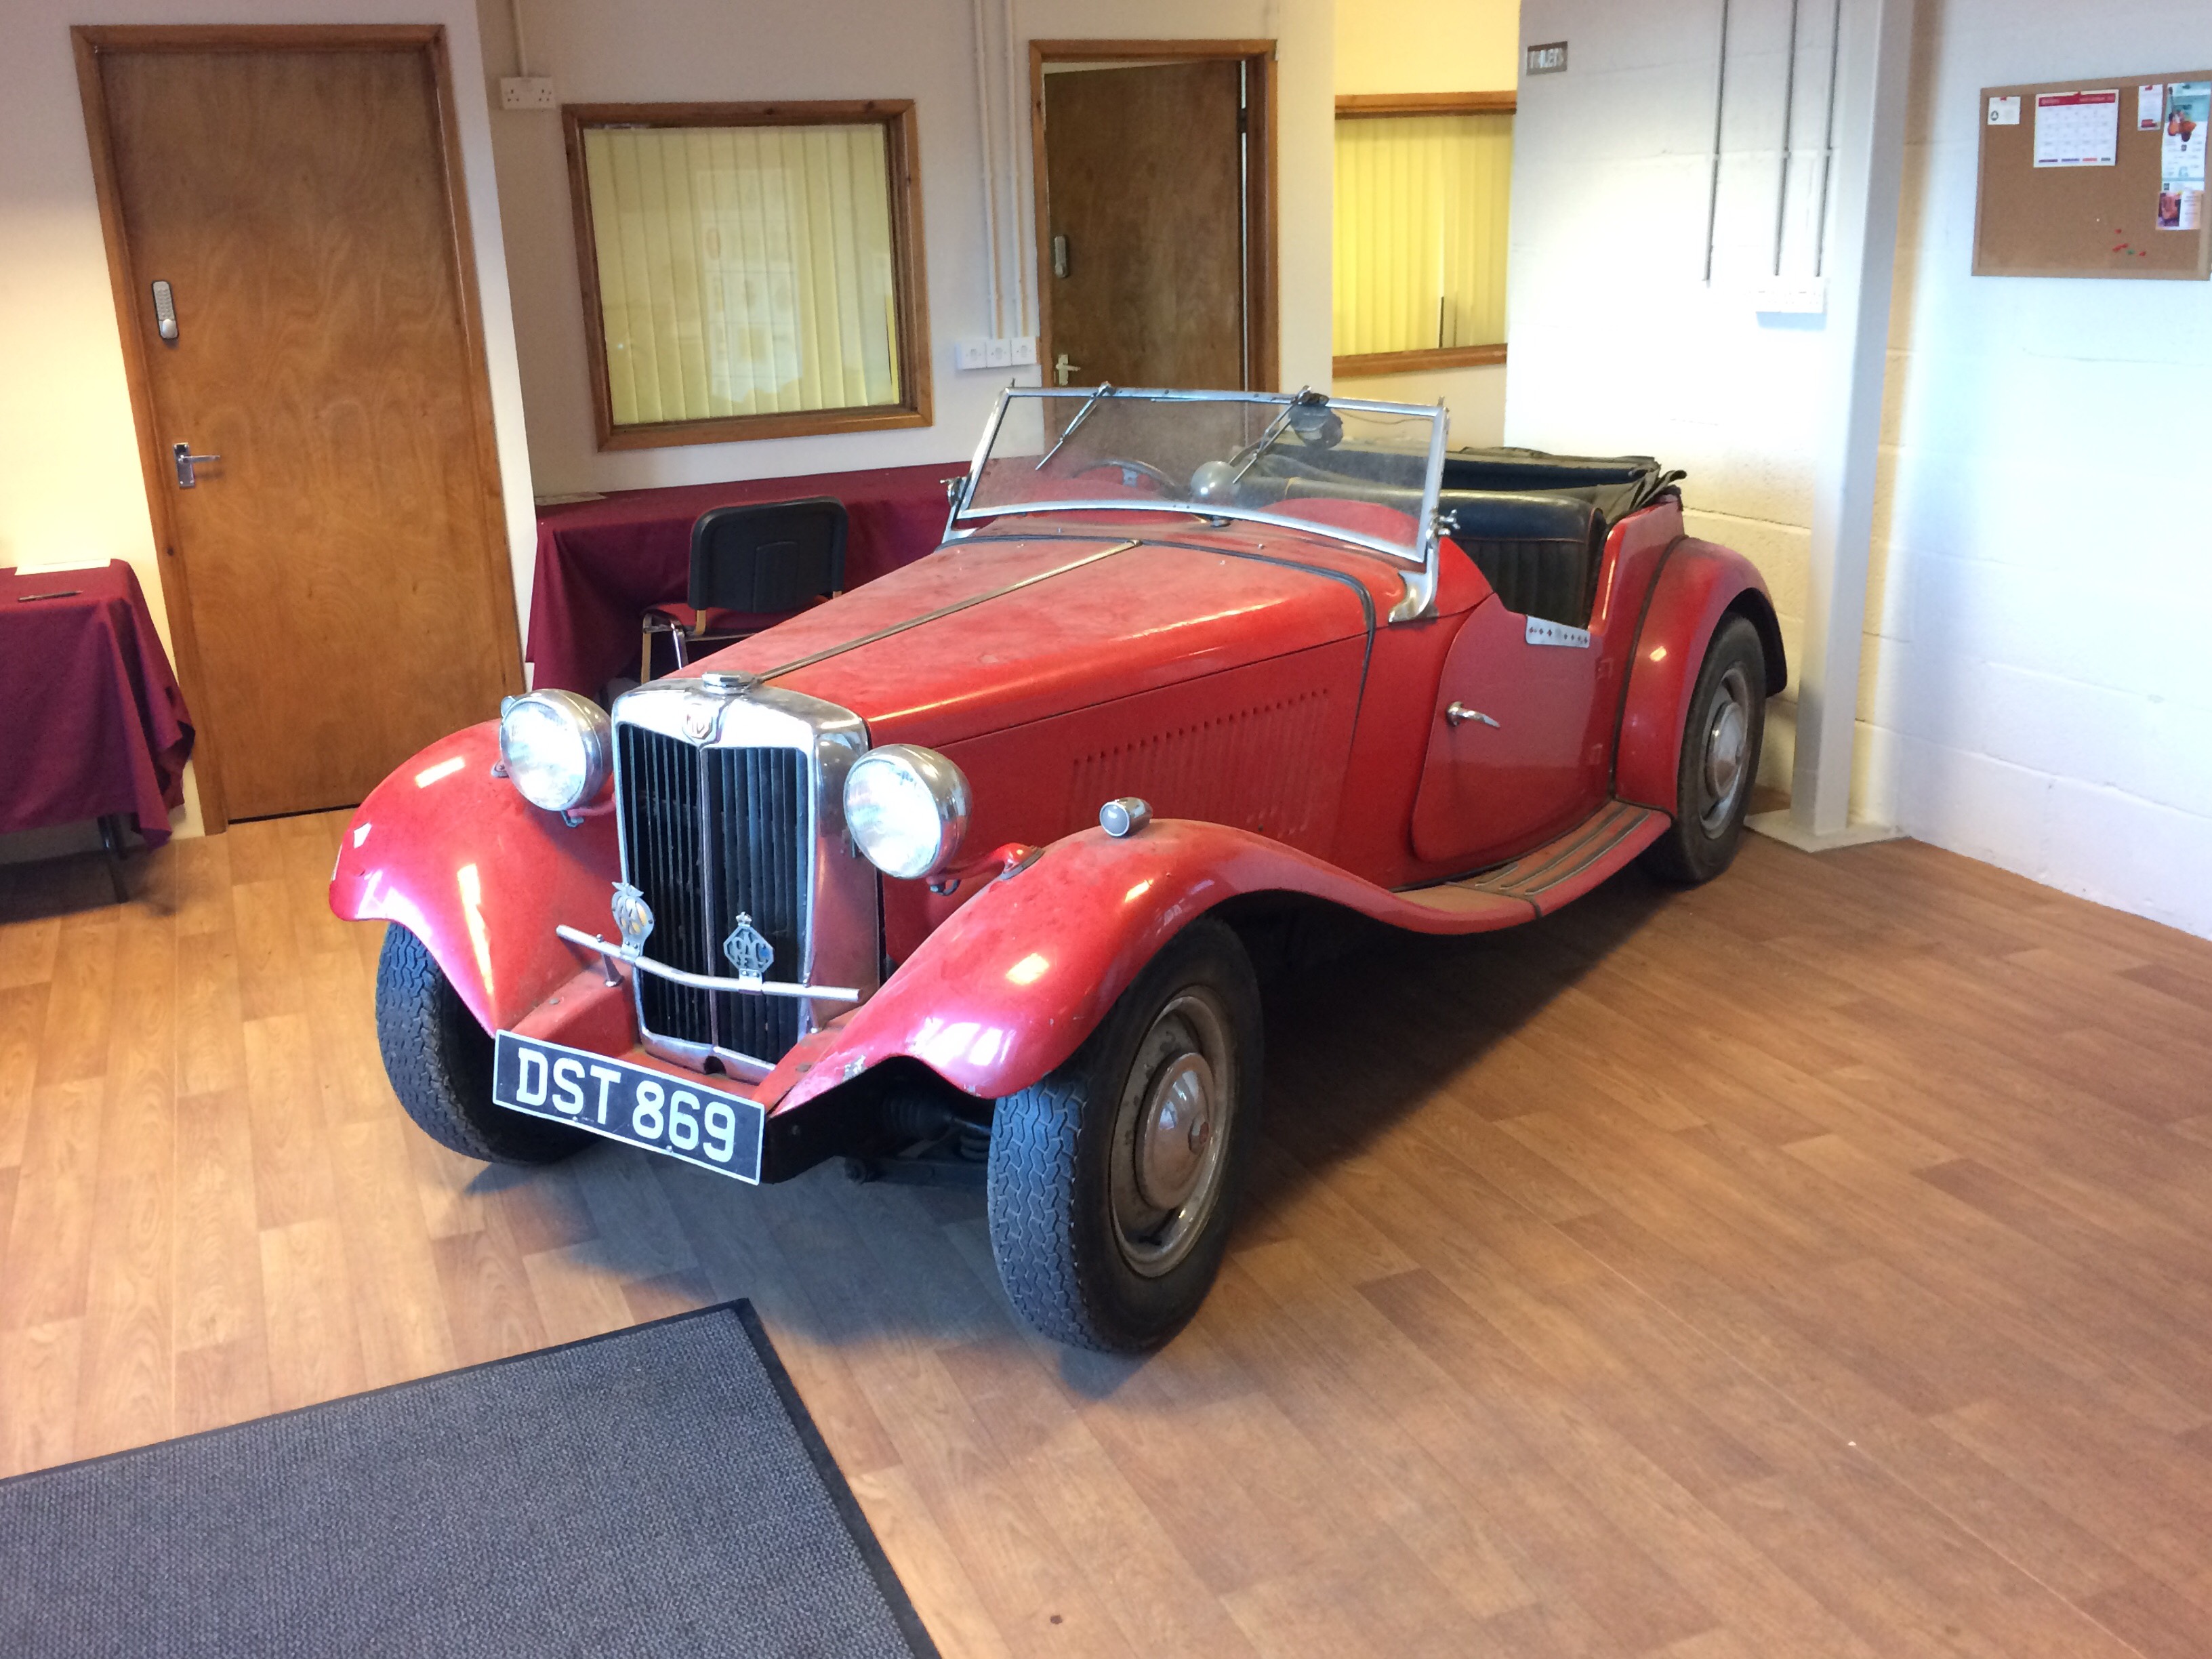 A 1950 MGTD Special, registration number DST 869, red.